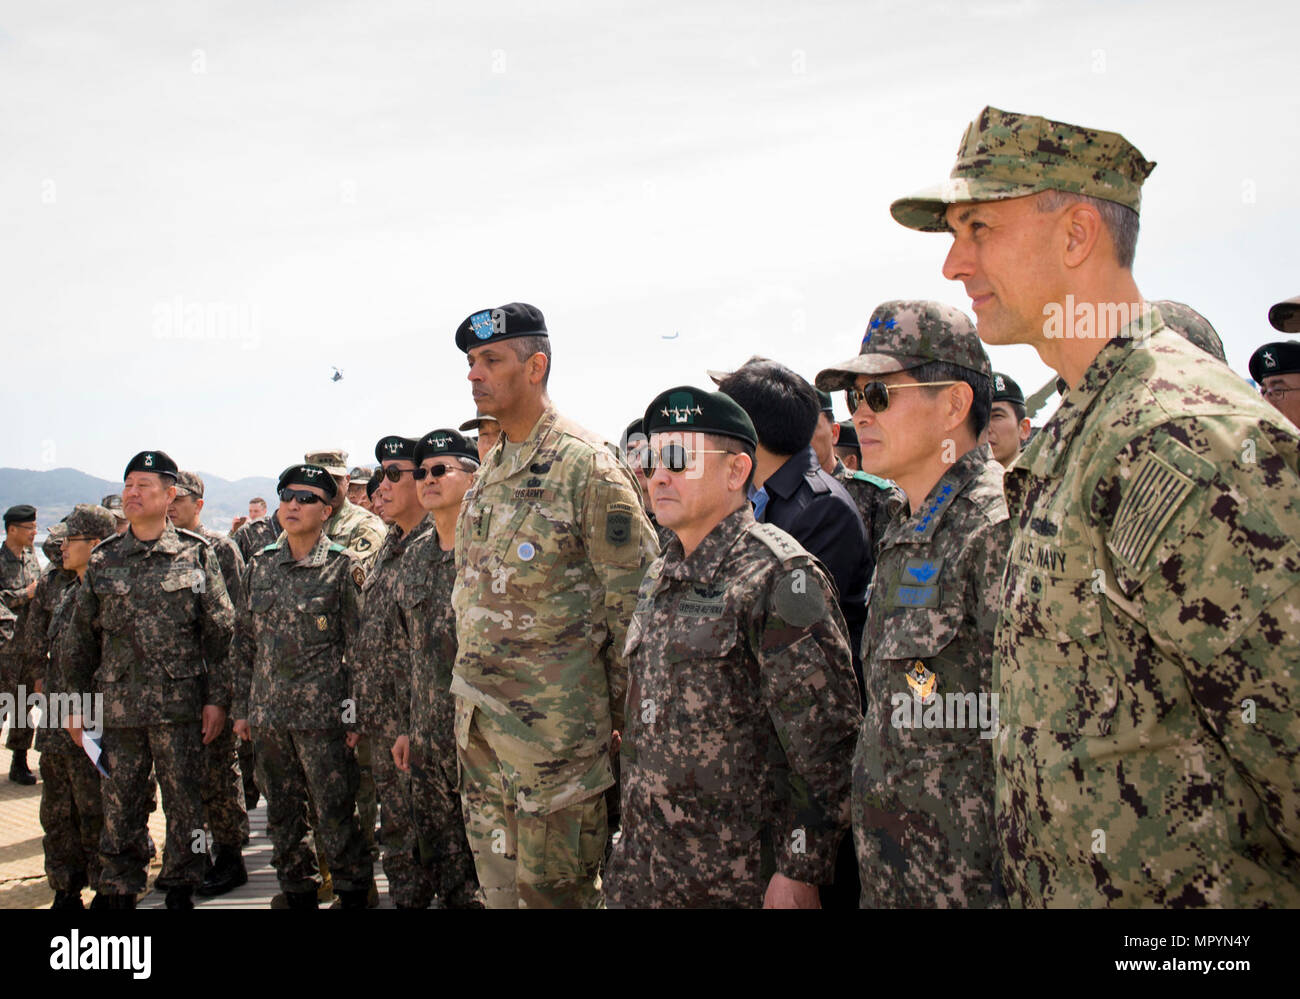 POHANG, Republic of Korea (April 12, 2017) – Rear Adm. Cathal S. O’Connor (right), commander of Expeditionary Strike Group 3, leads Gen. Vincent K. Brooks (left center), United Nations Commander, Combined Forces Commander and United States Forces Korea commander, on a tour of commands taking part in Operation Pacific Reach Exercise 2017 (OPRex17). OPRex17 is a bilateral training event designed to ensure readiness and sustain the ROK-U.S. Alliance by exercising an Area Distribution Center (ADC), an Air Terminal Supply Point (ATSP), Combined Joint Logistics Over-the-Shore (CJLOTS), and the use o Stock Photo